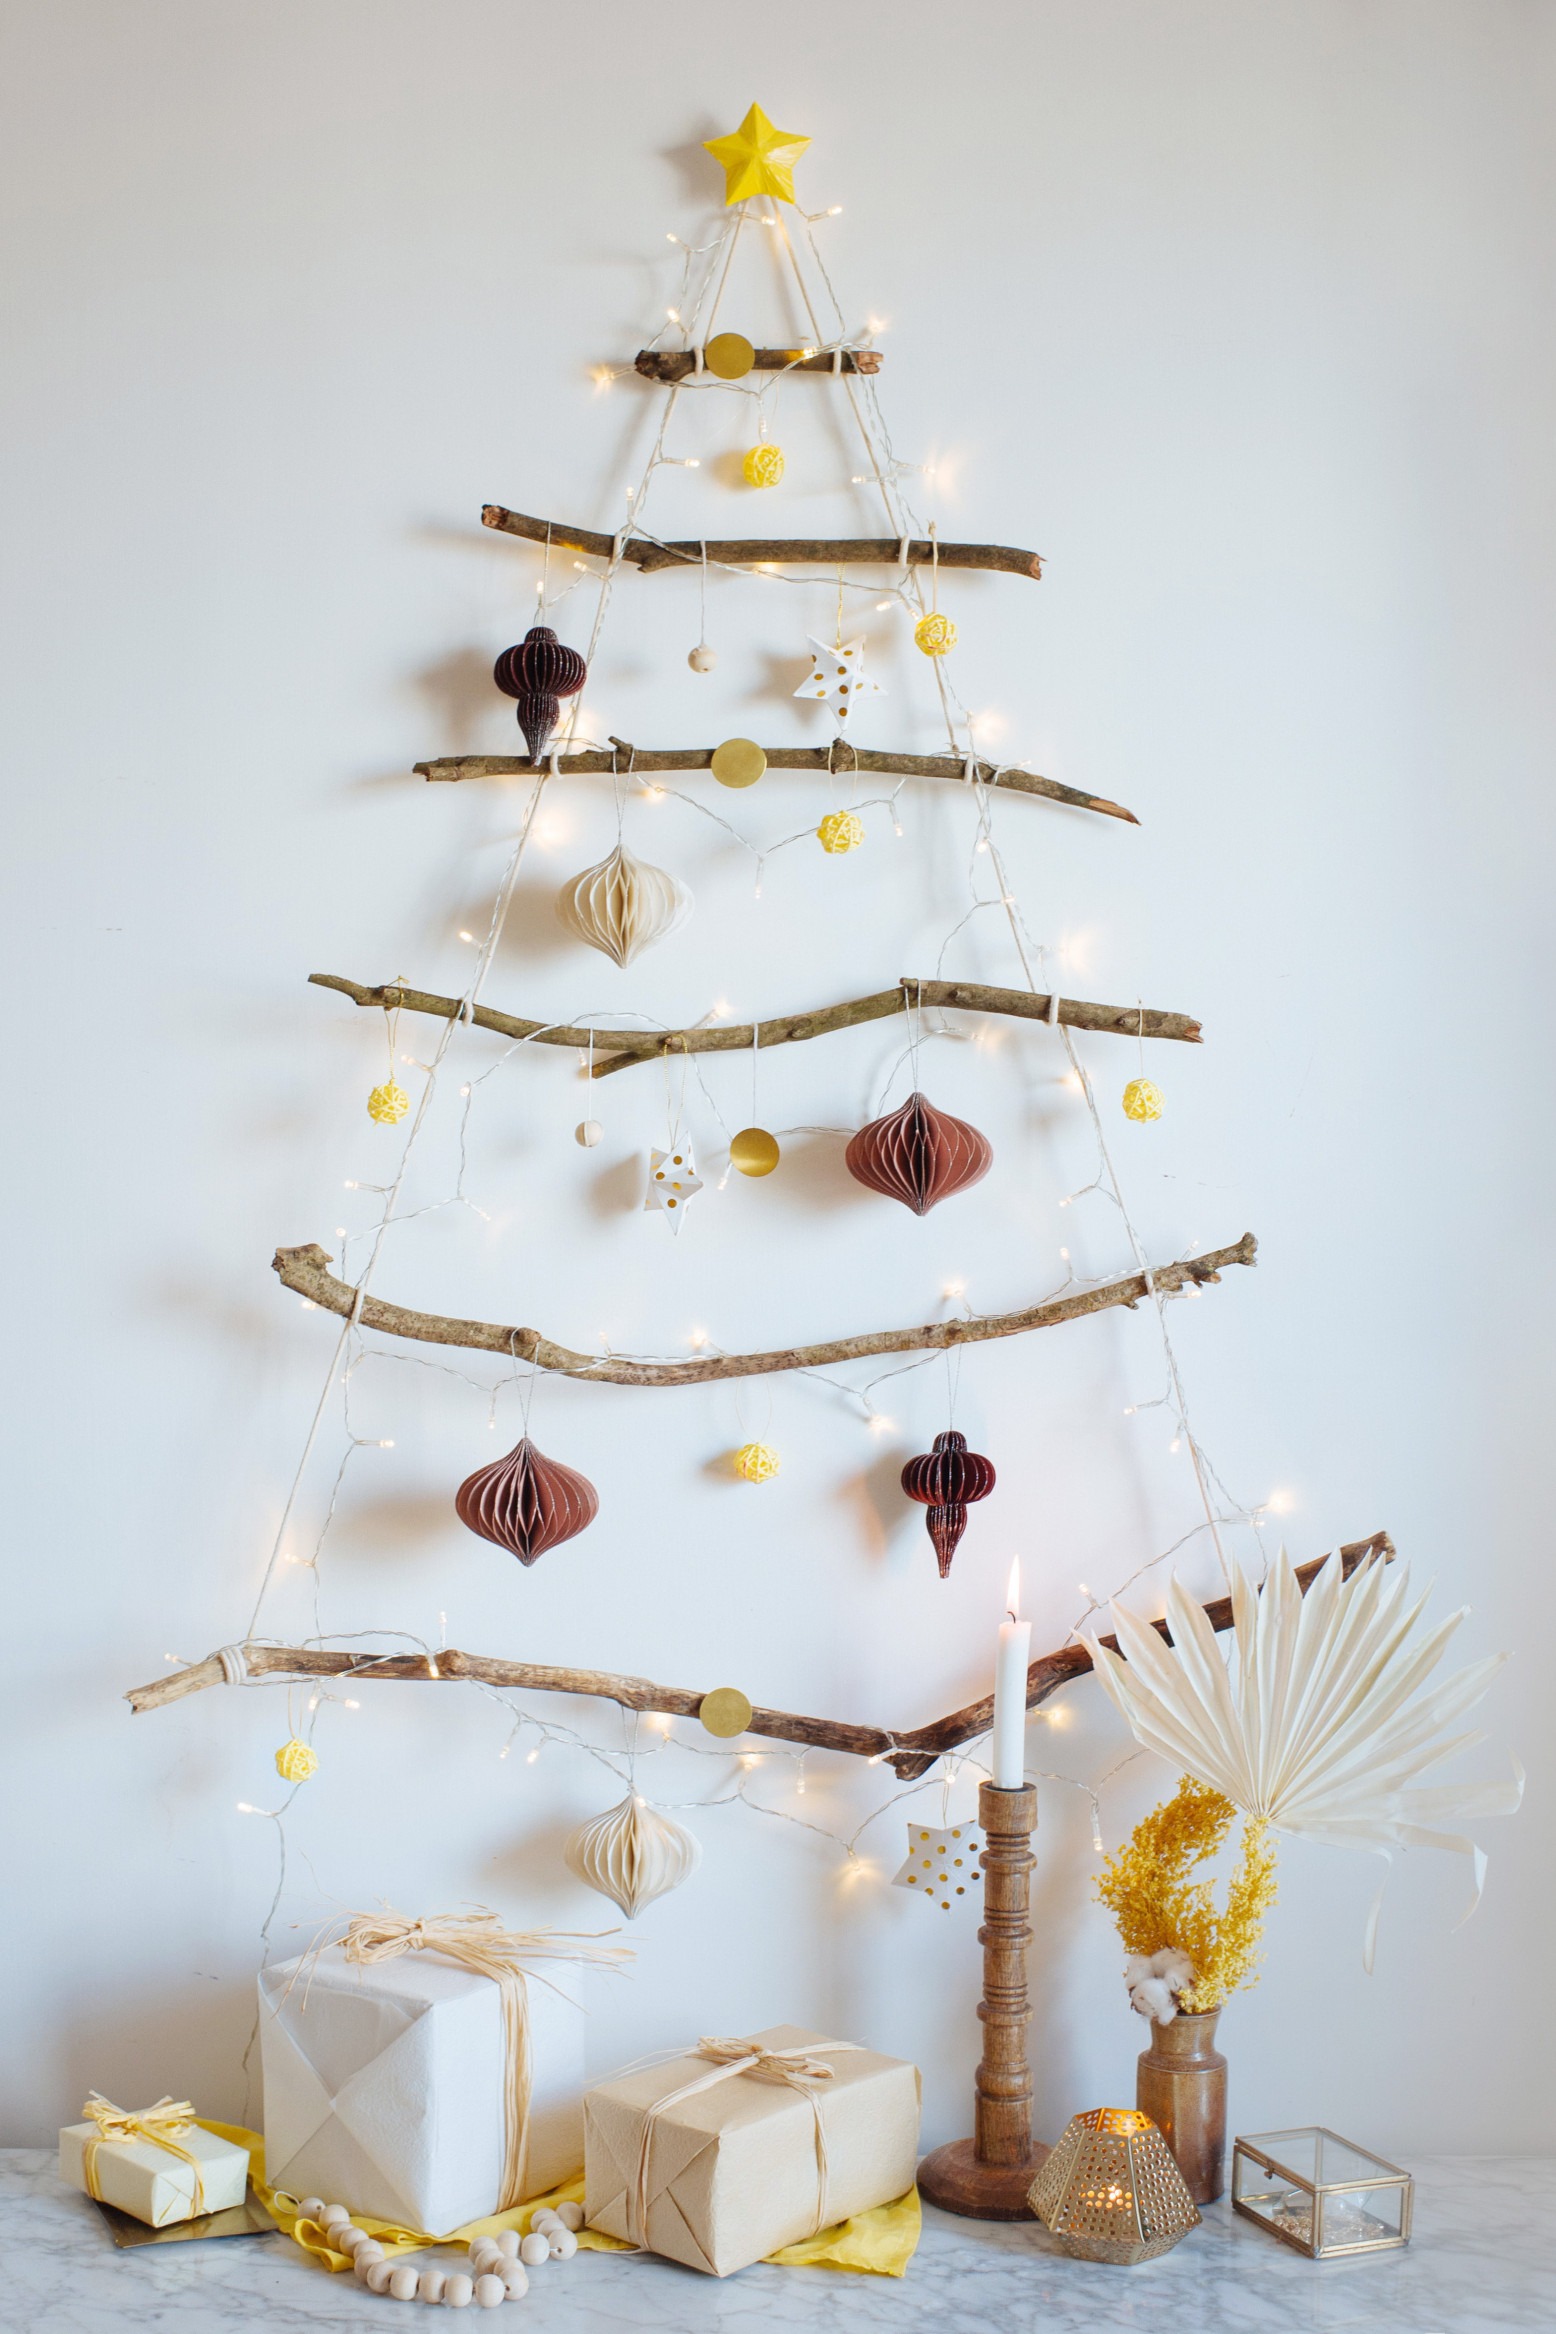 rustic country Christmas decorations - Pine Branch Christmas Tree: Nature's Beauty